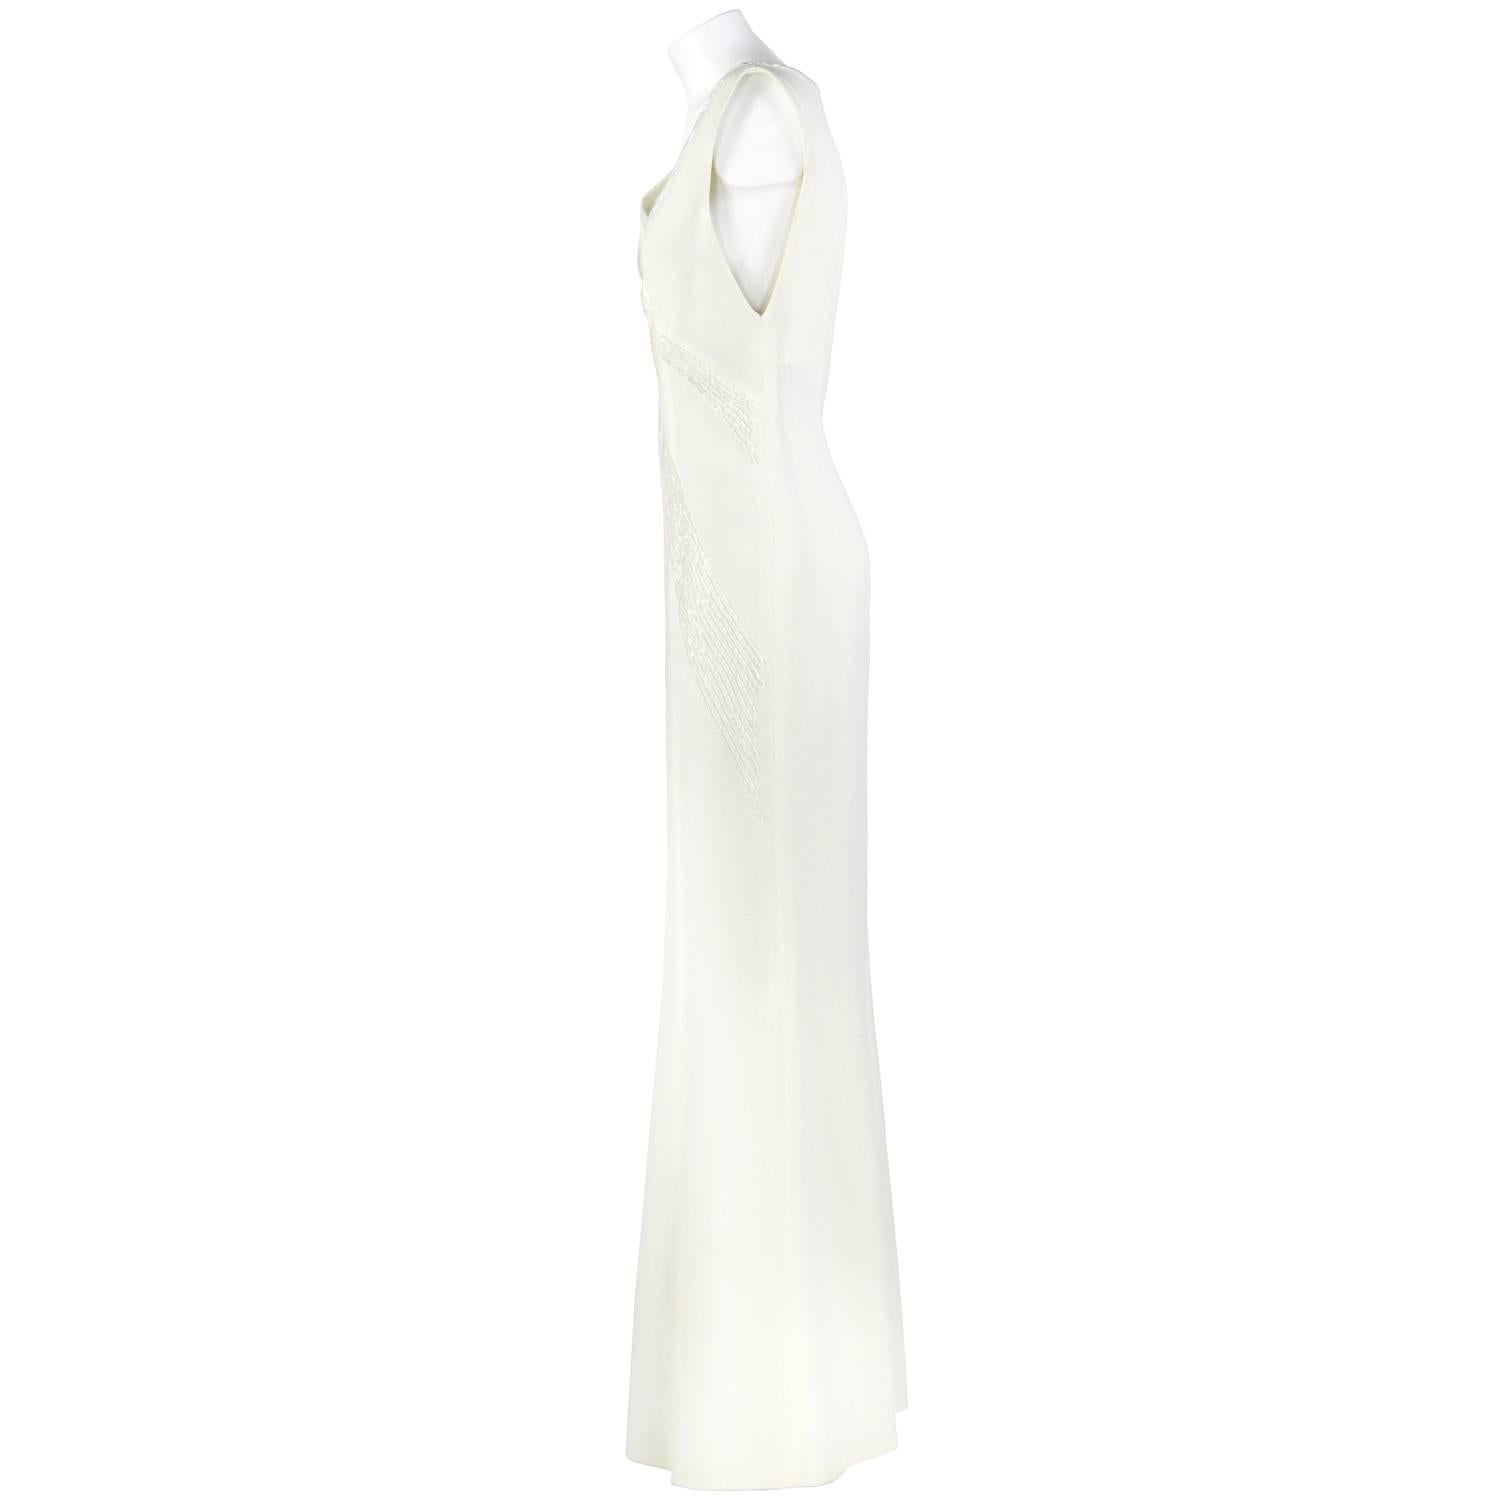 Marvelous Gianni Versace wedding dress, Versatile line, in white milk color. It features a splendid beads decoration on the front. Zip closure on the back. The item is vintage, it was produced in the 2000s and is in excellent conditions. It comes